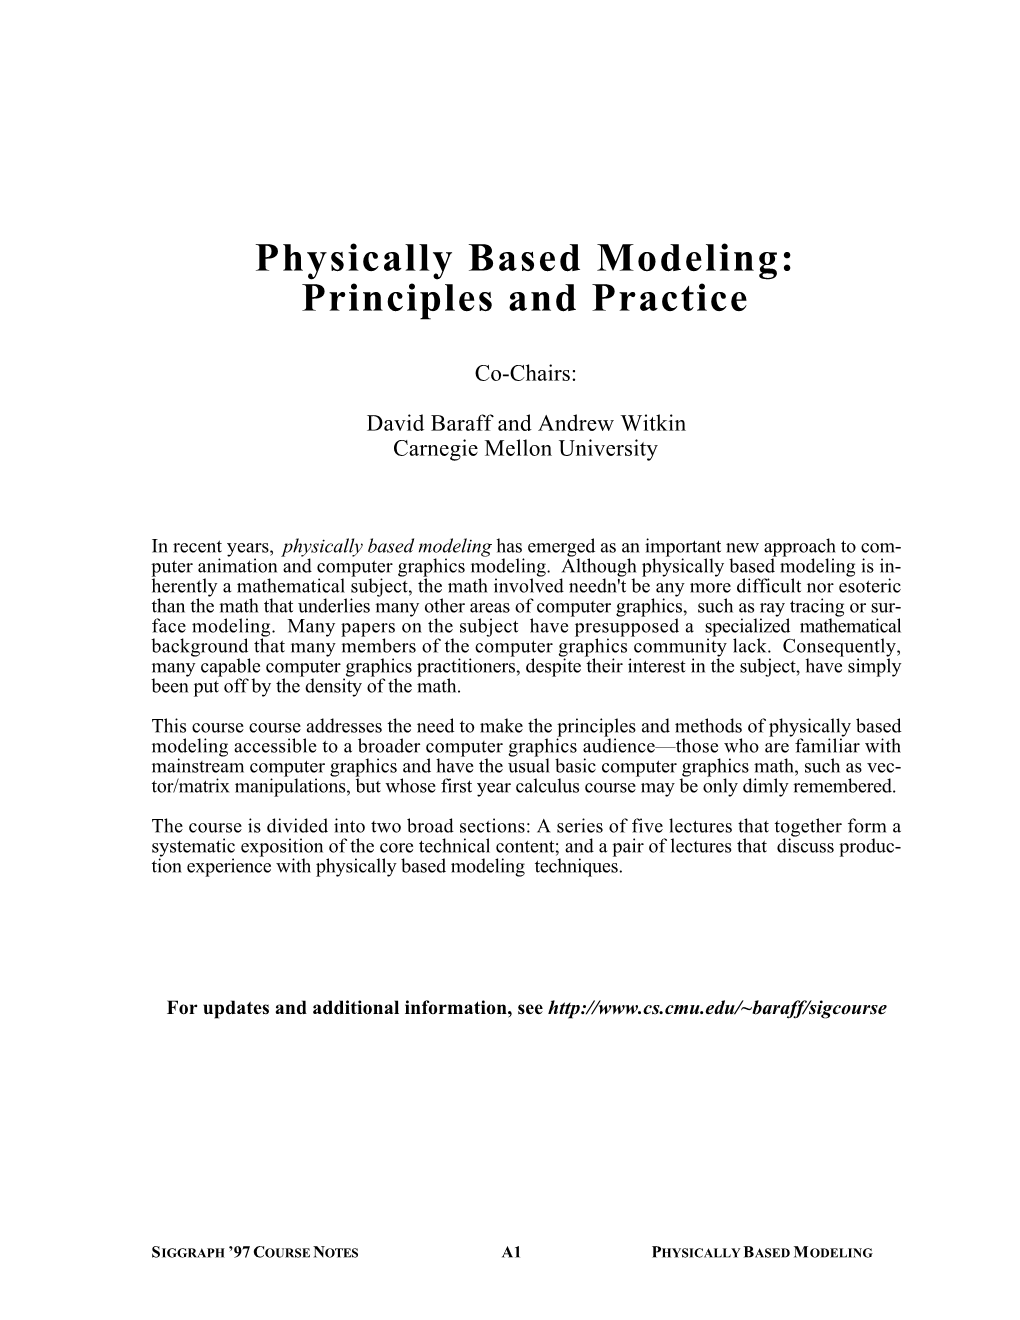 Physically Based Modeling: Principles and Practice